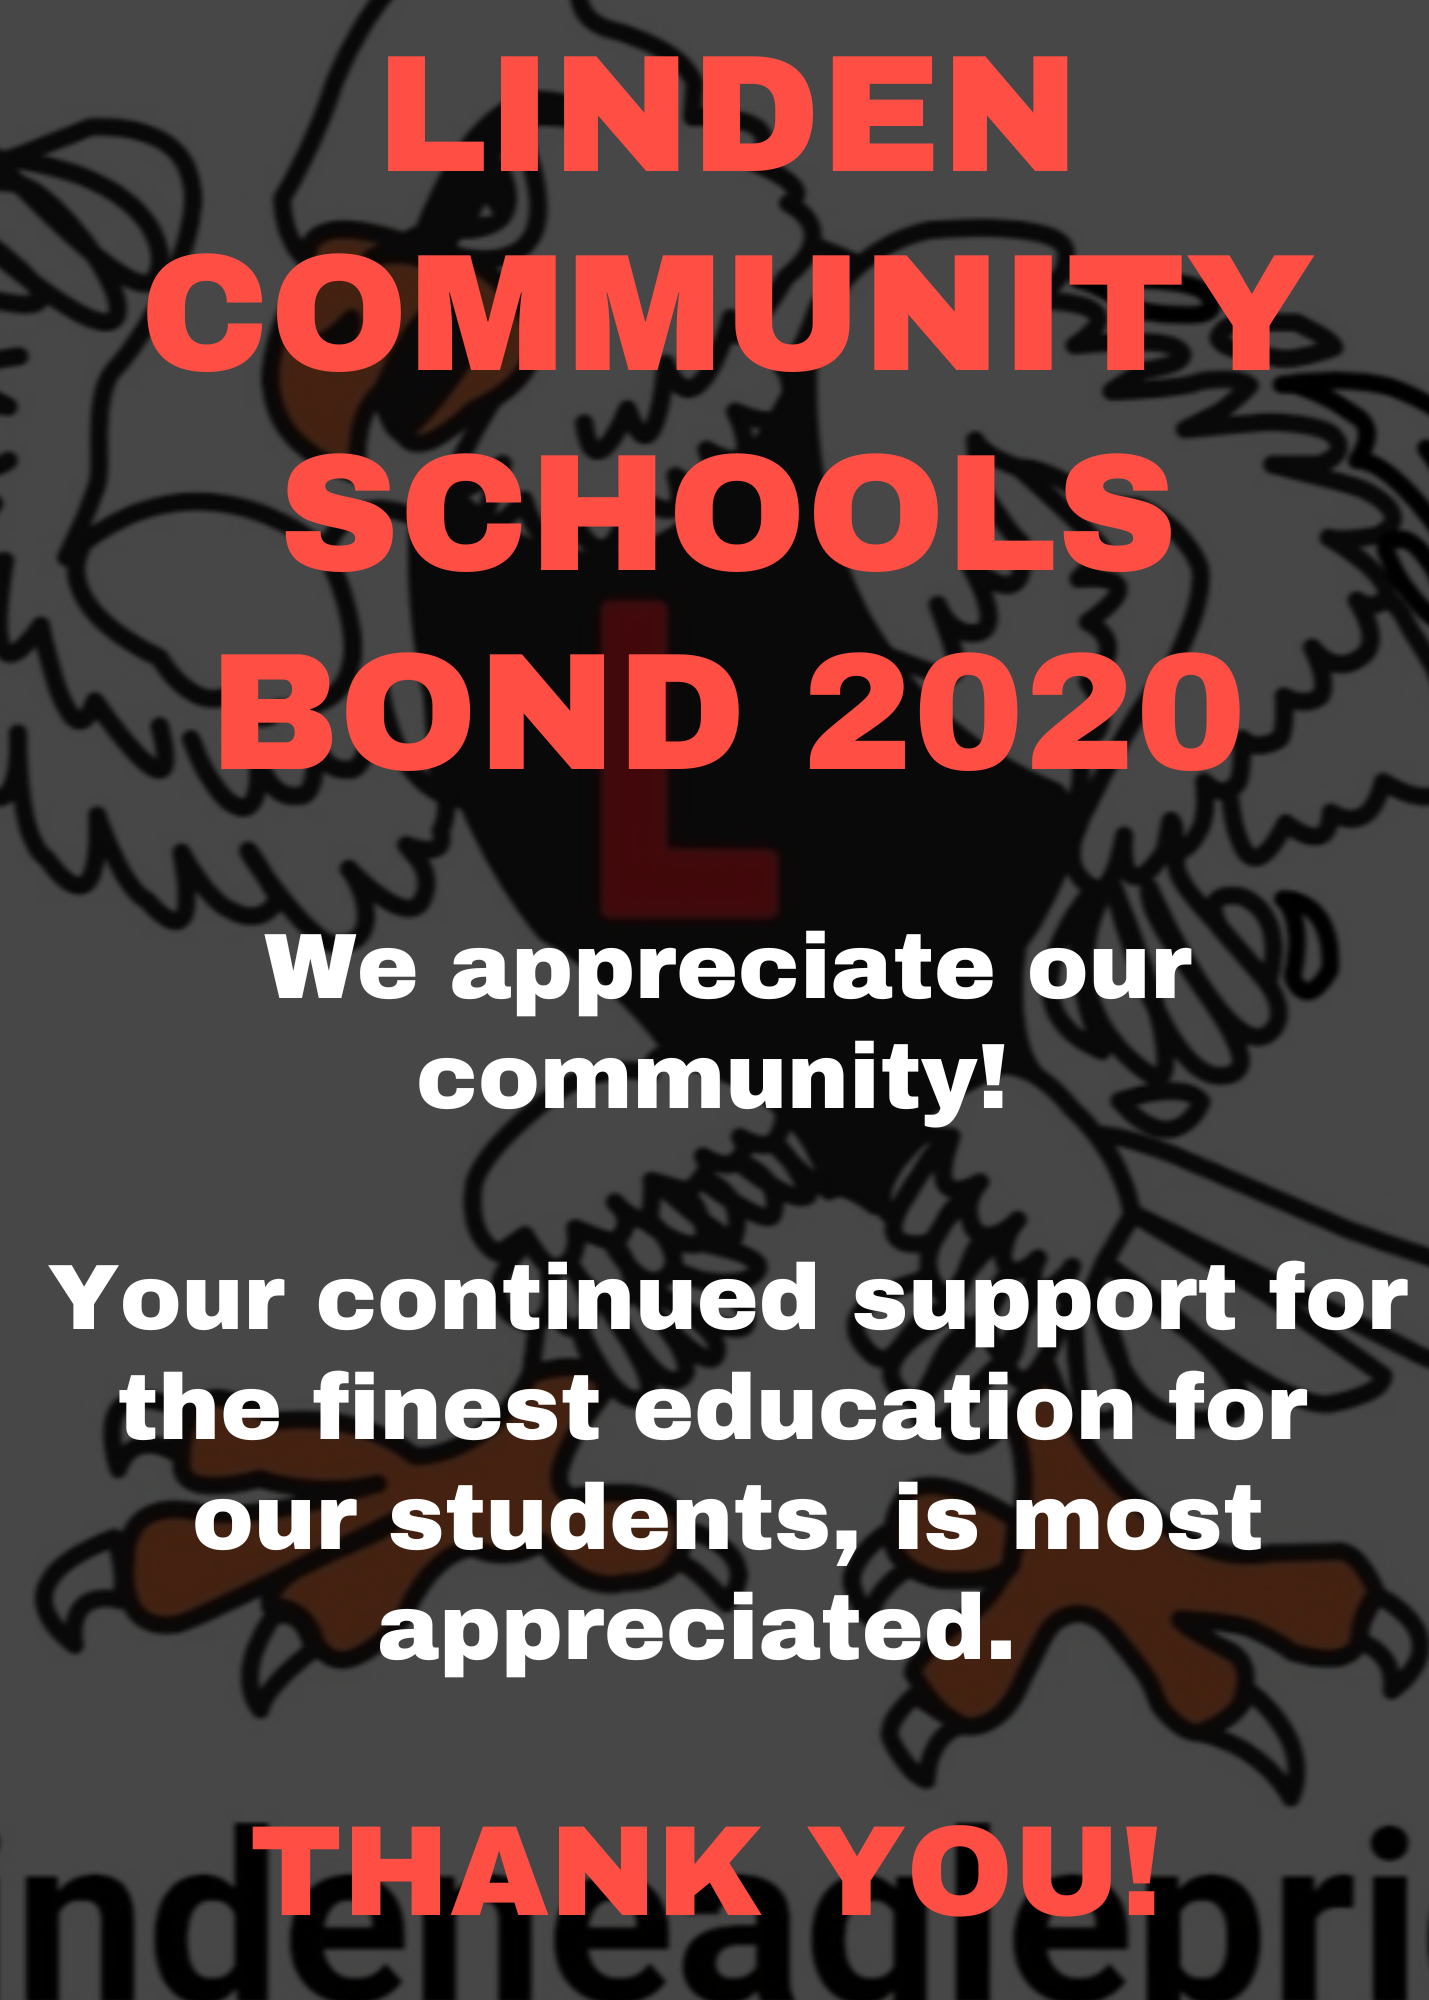 Thank you to our community